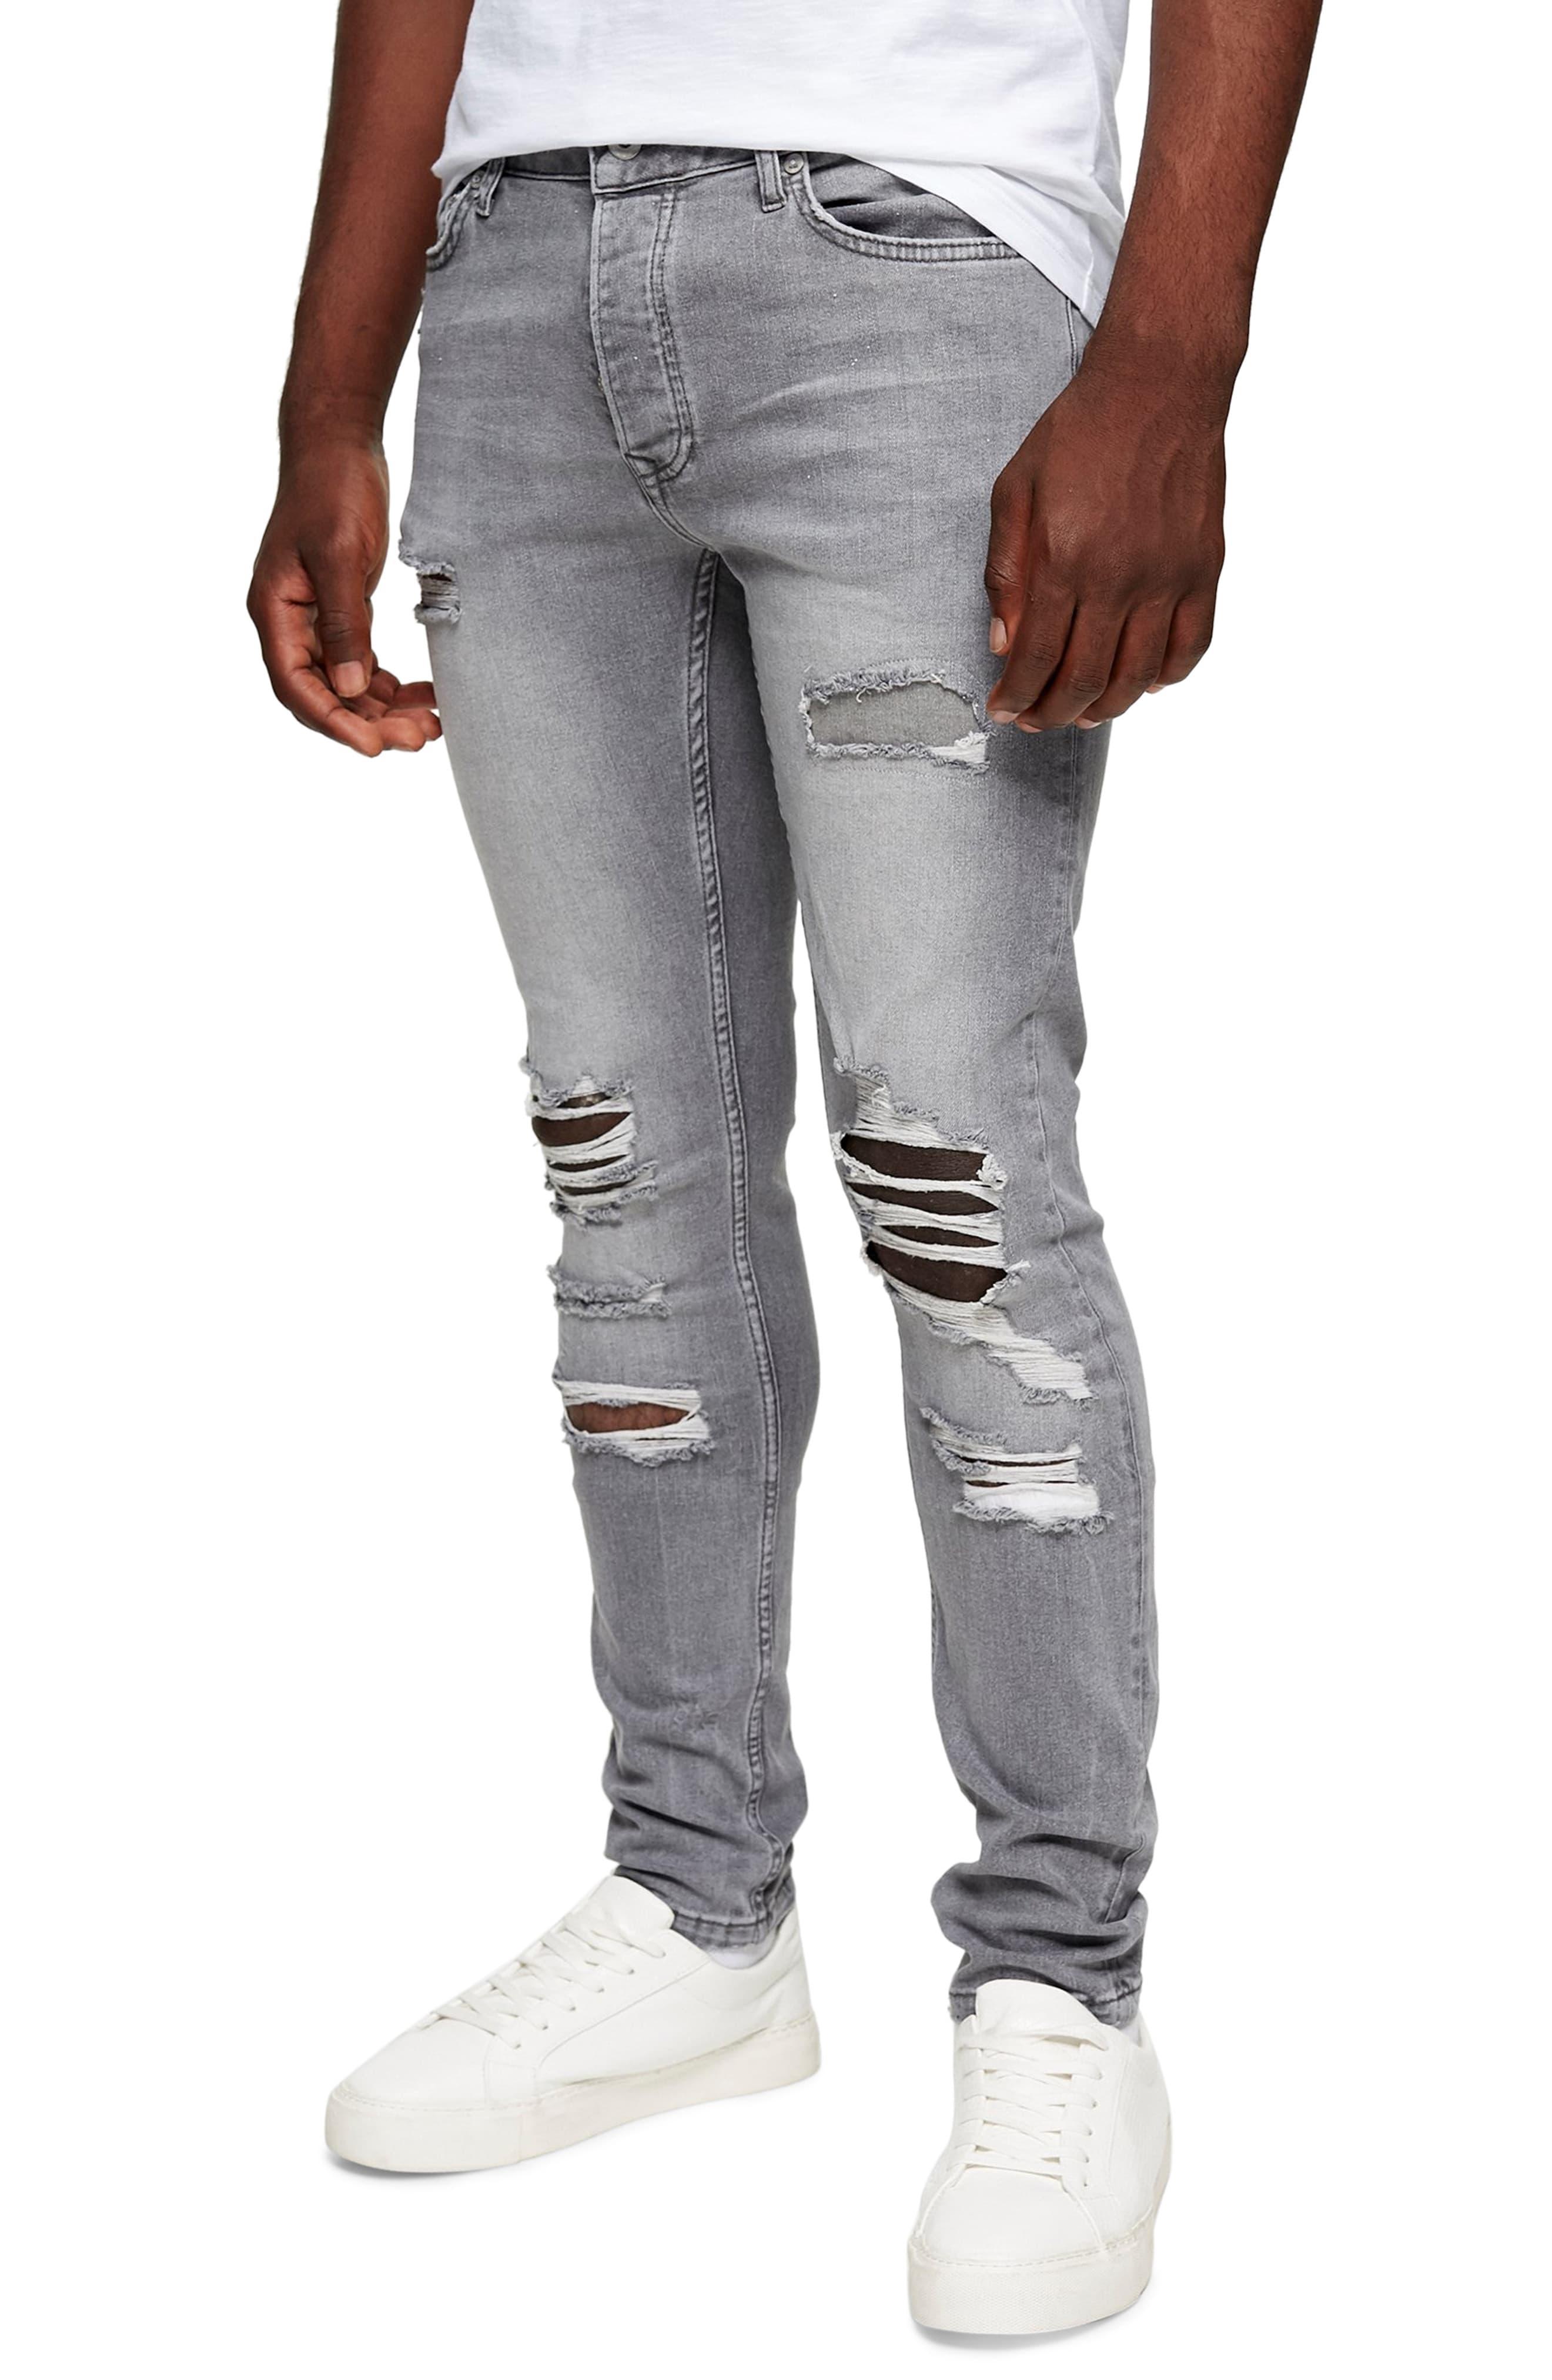 Ripped Jeans Men